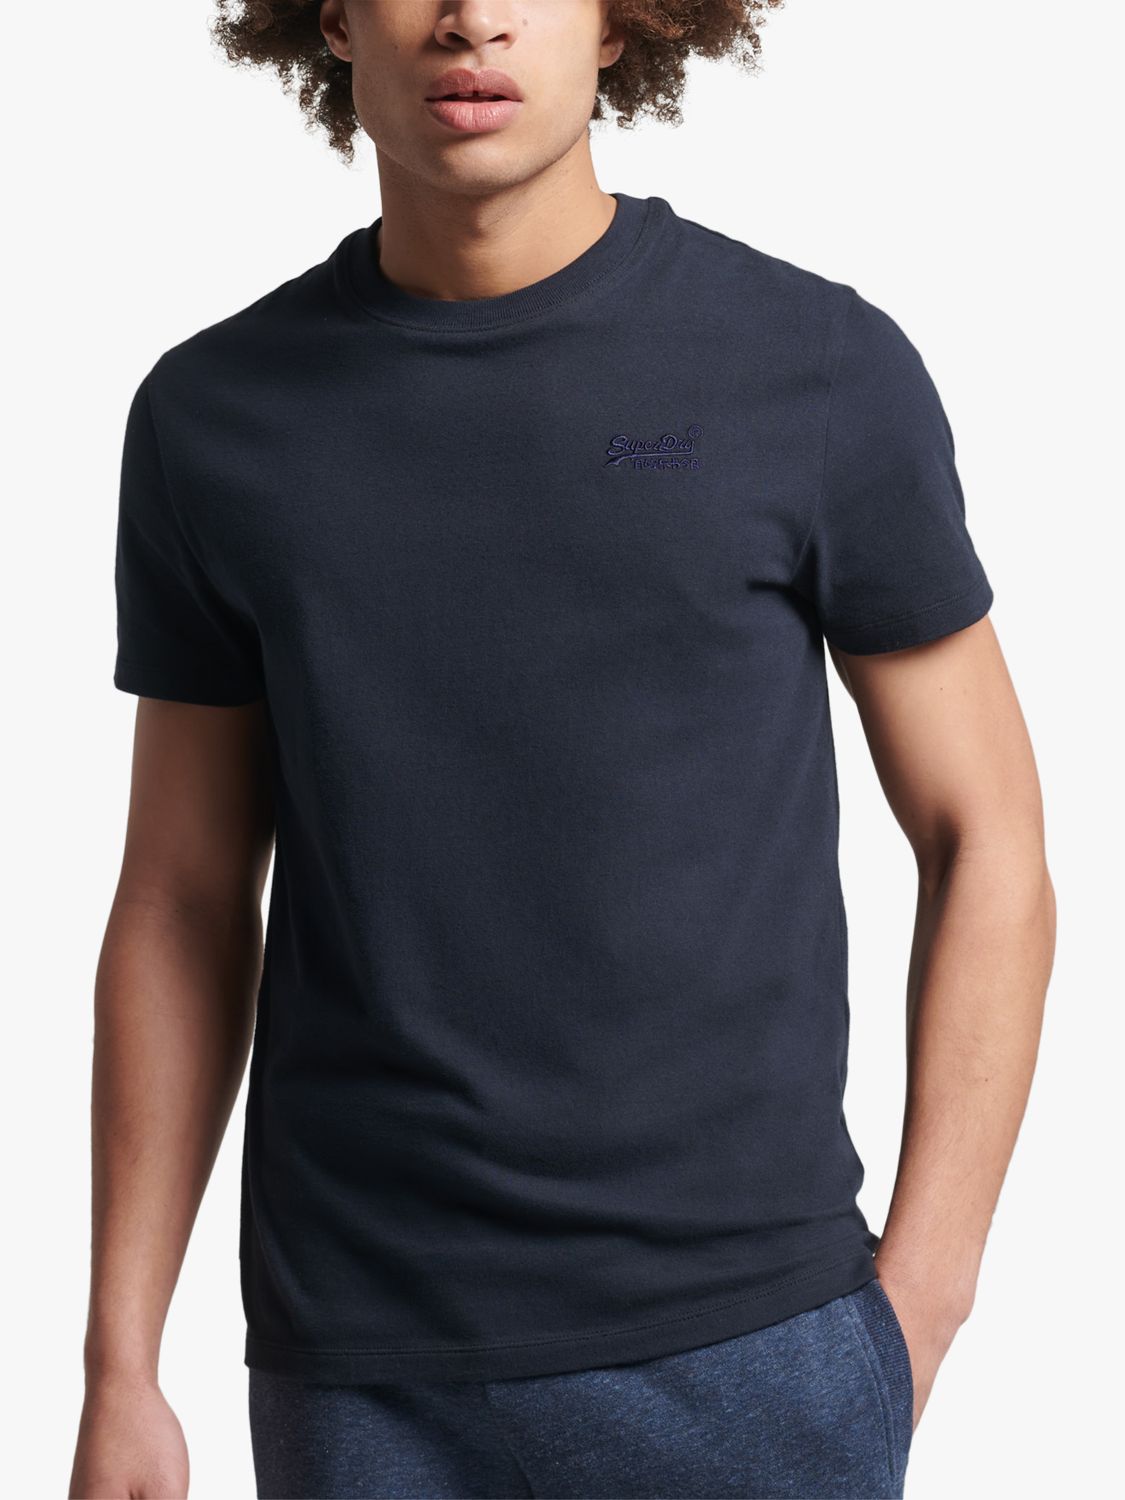 Logo John Vintage Organic Embroidered Eclipse Cotton & T-Shirt, Lewis Partners Superdry Navy at